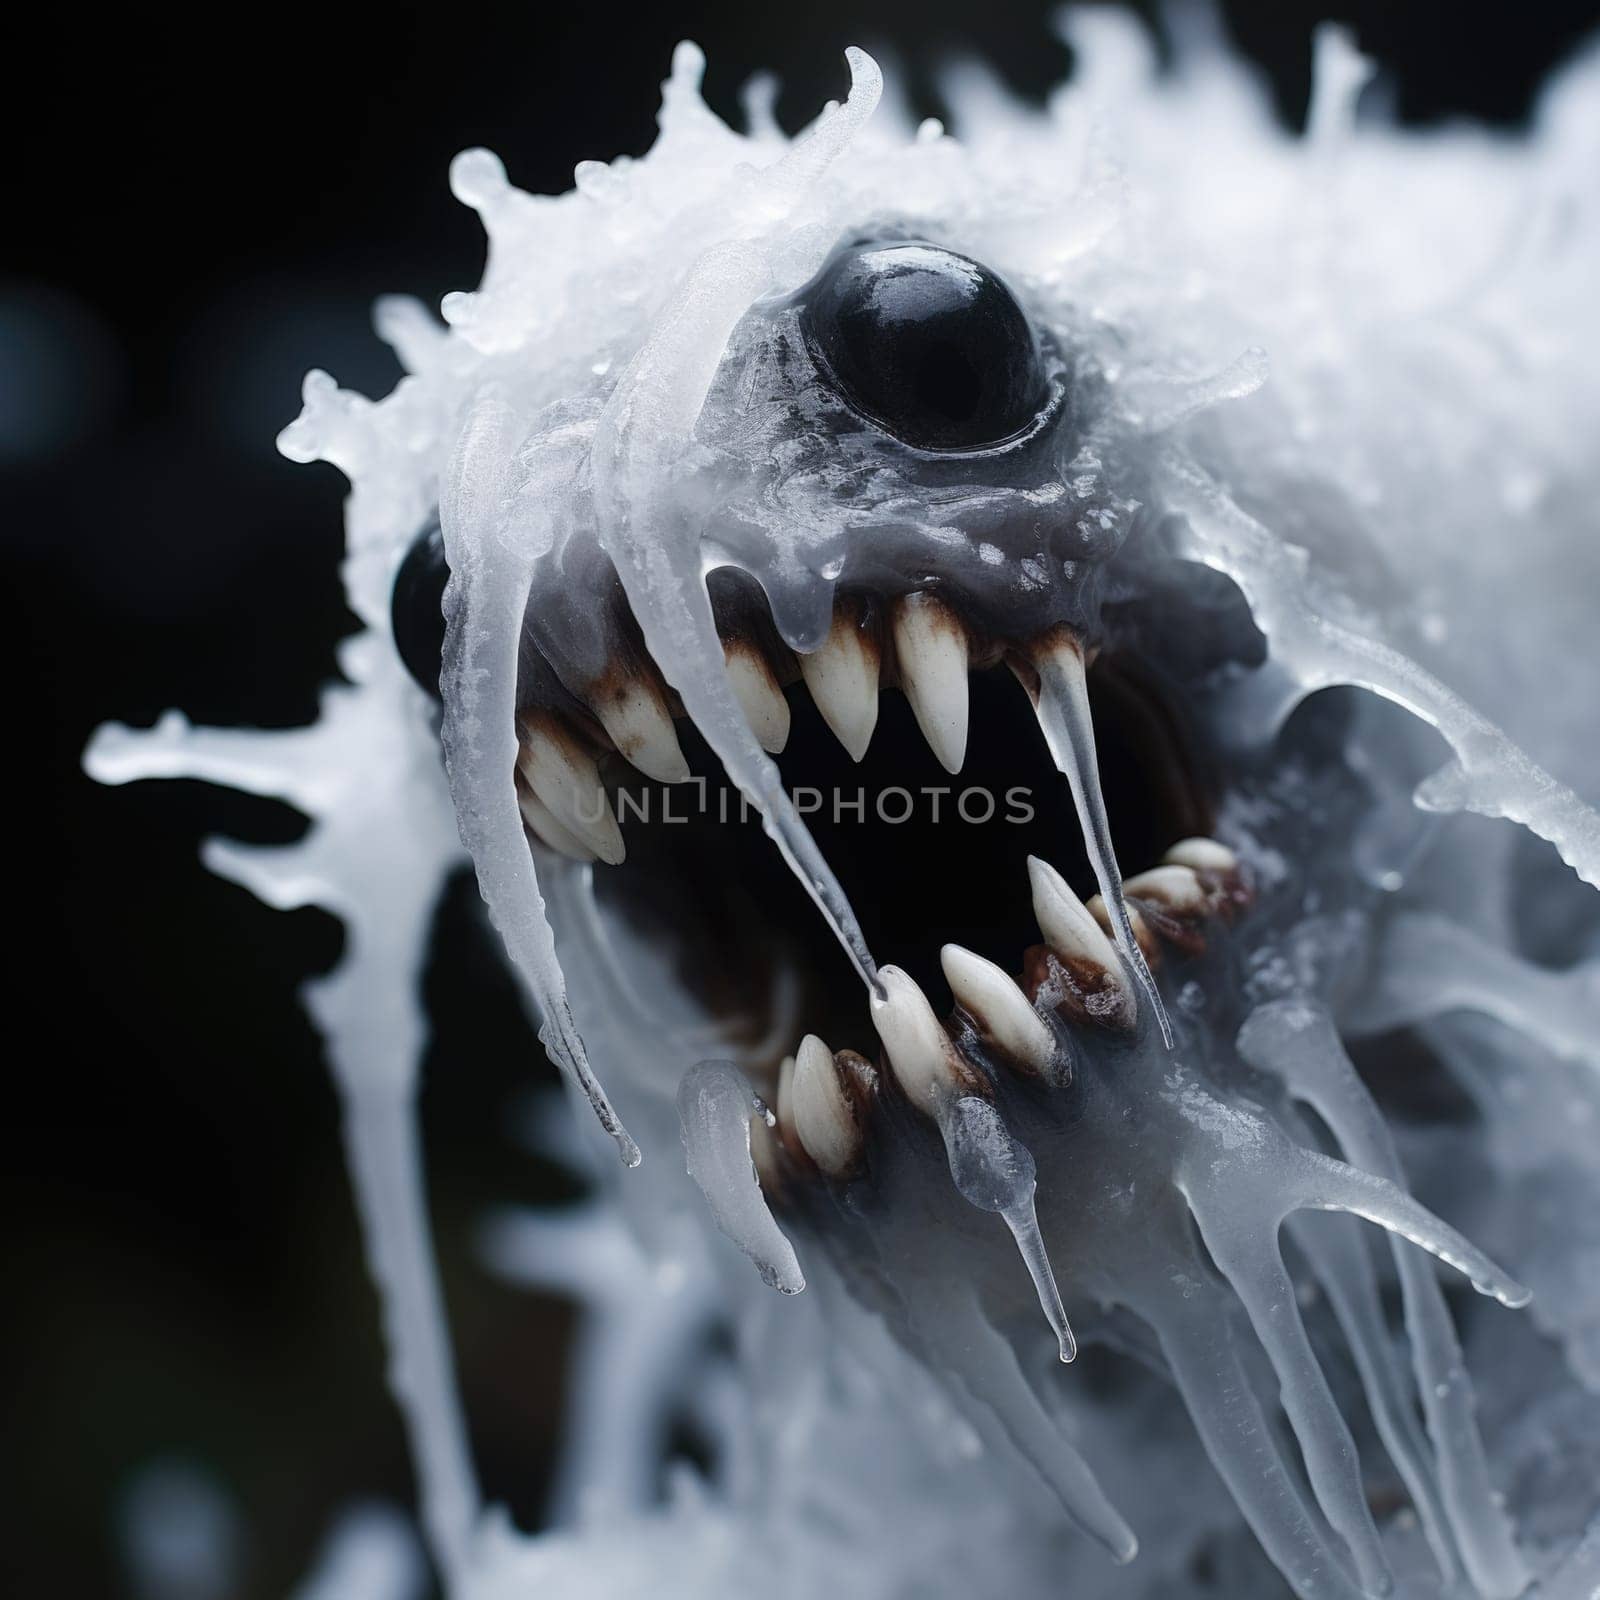 A close up of a frozen monster with its mouth open, AI by starush